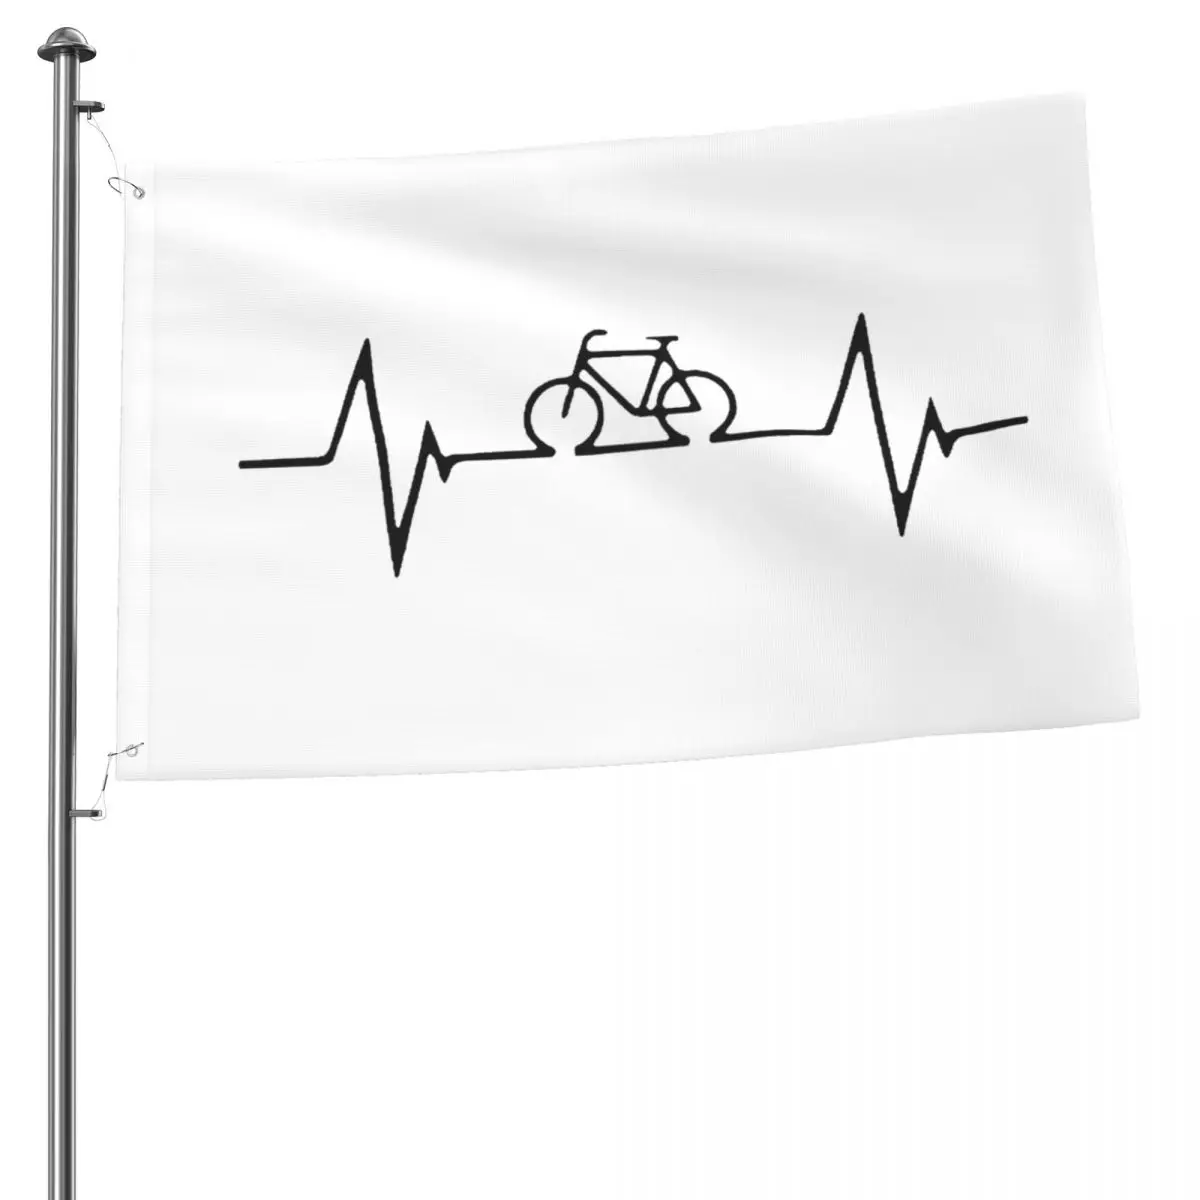 

Bike Heartbeat Cycling Mountain Bike Outdoor Flag Decorative Banners For Home Decor House Yard Outdoor Party Supplies 2x3ft